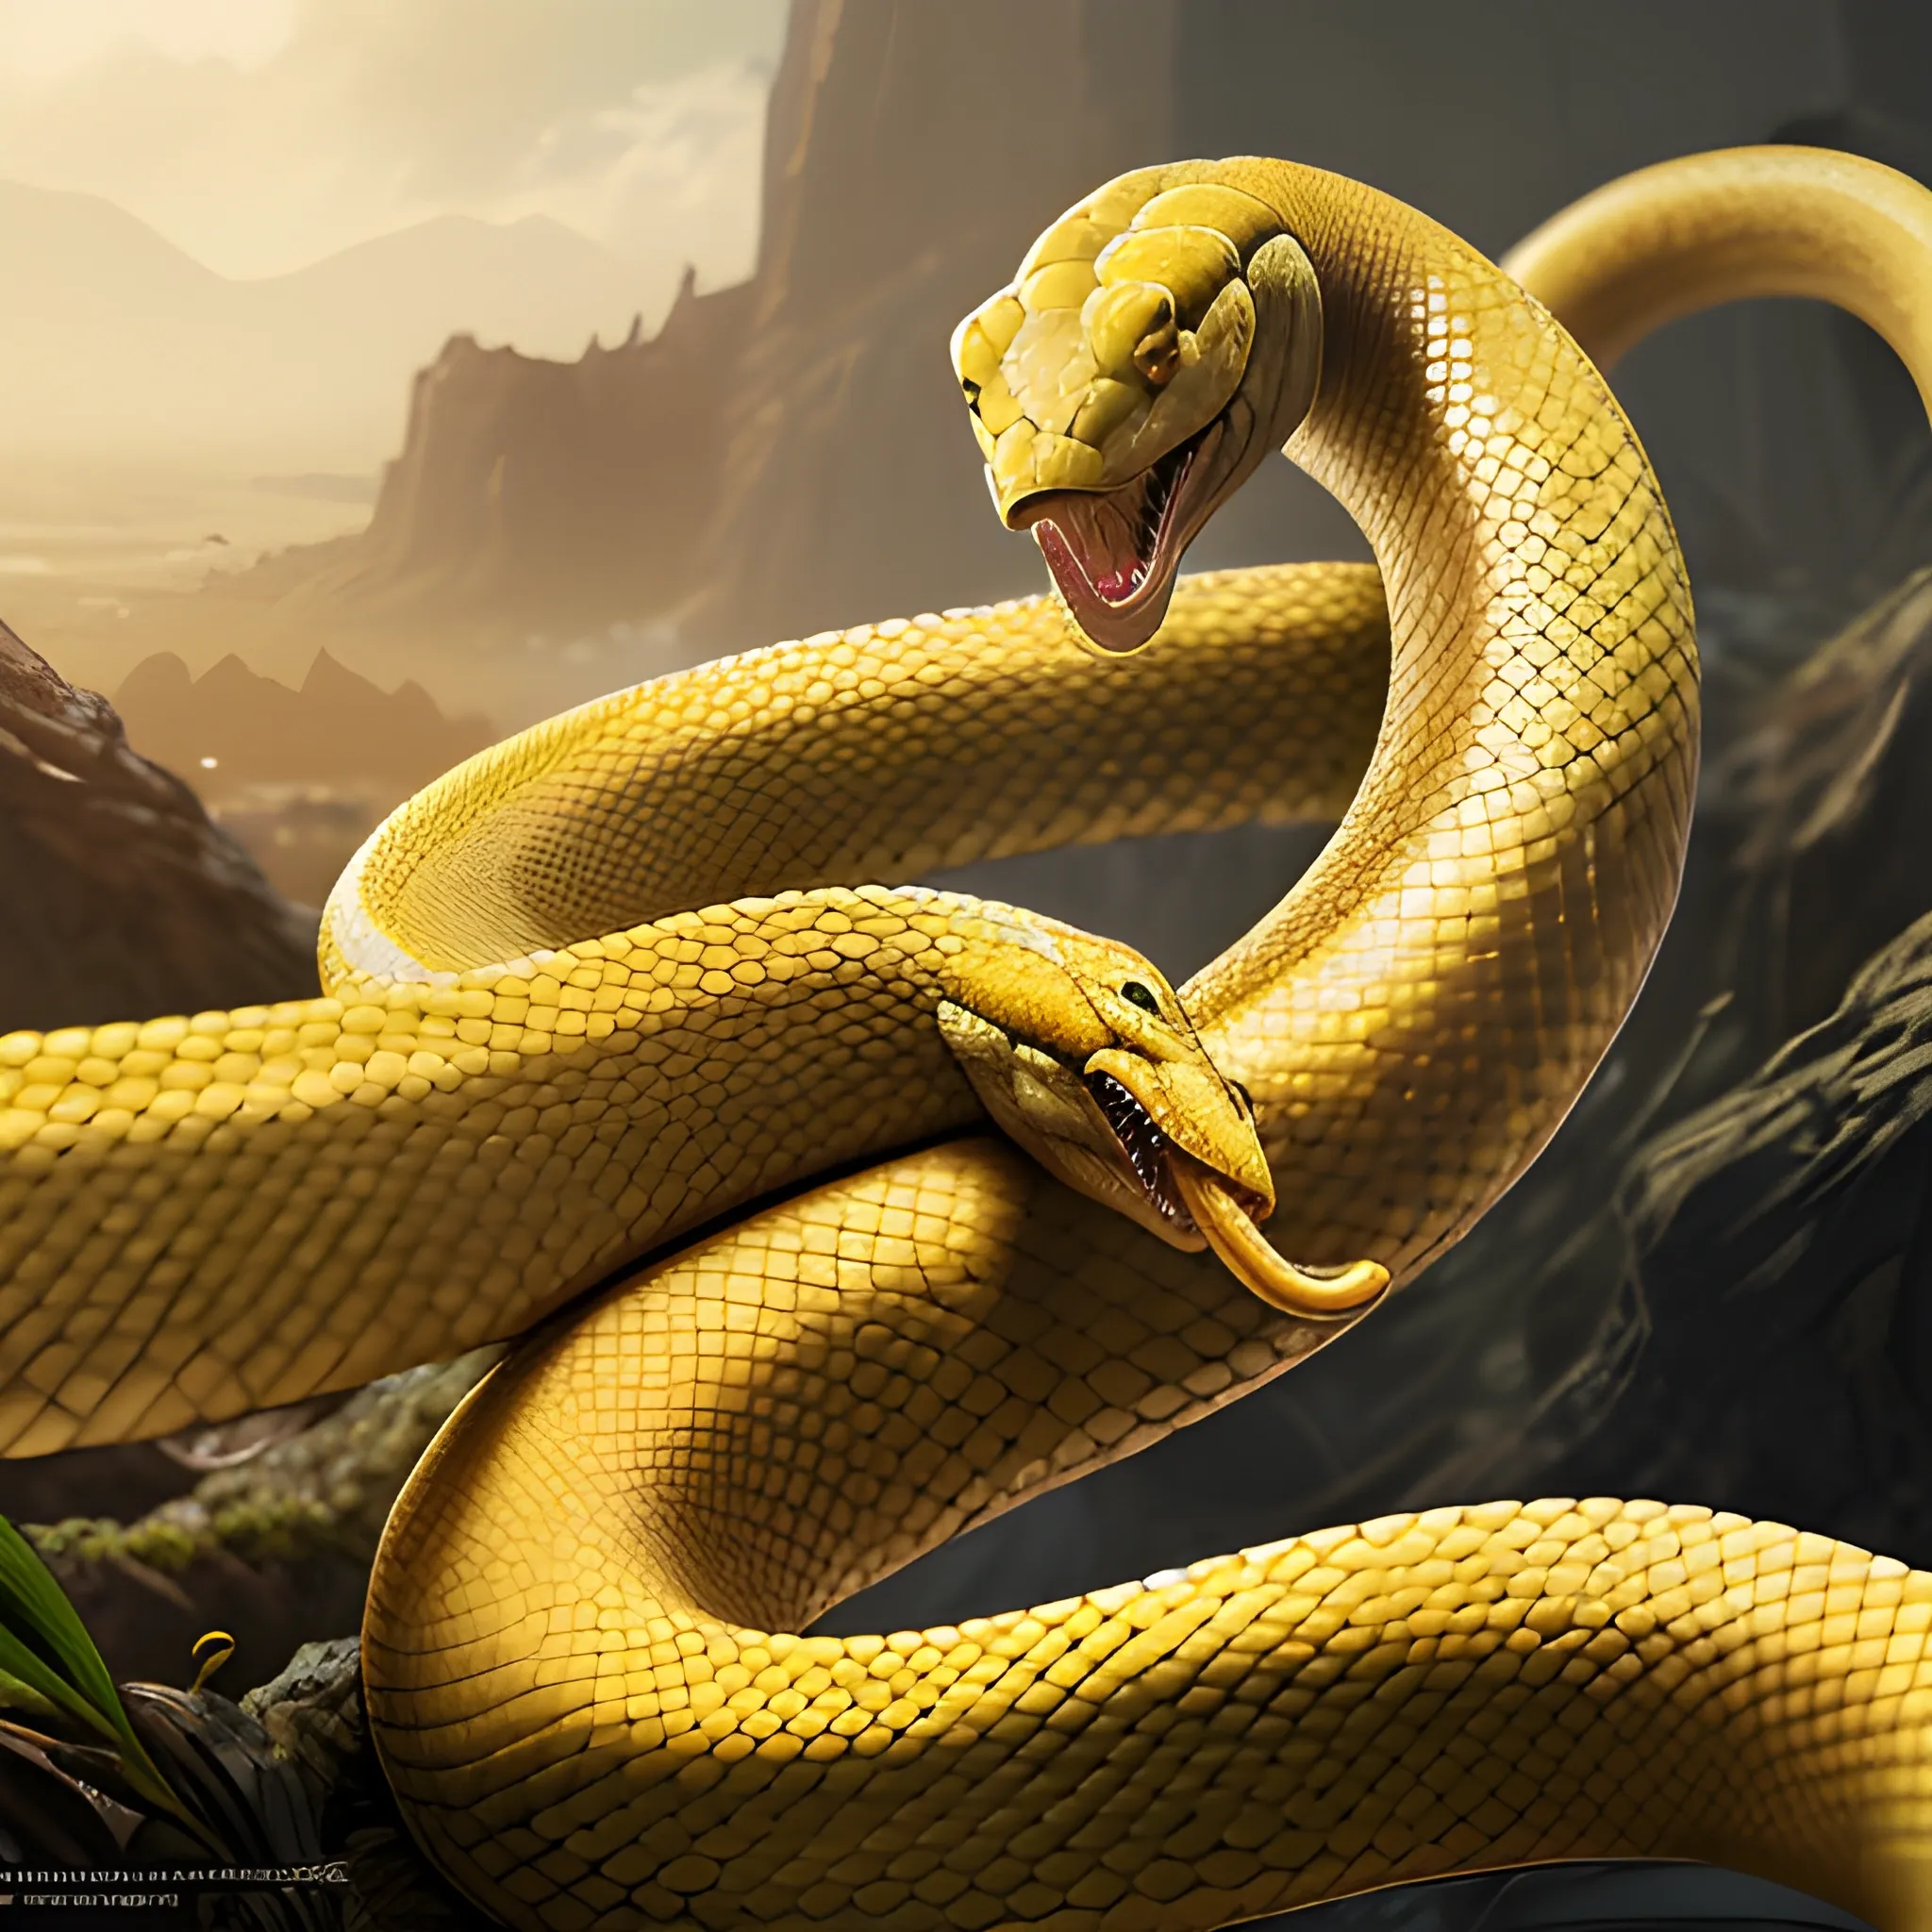 Premium AI Image  Beautiful snake ful challenging color